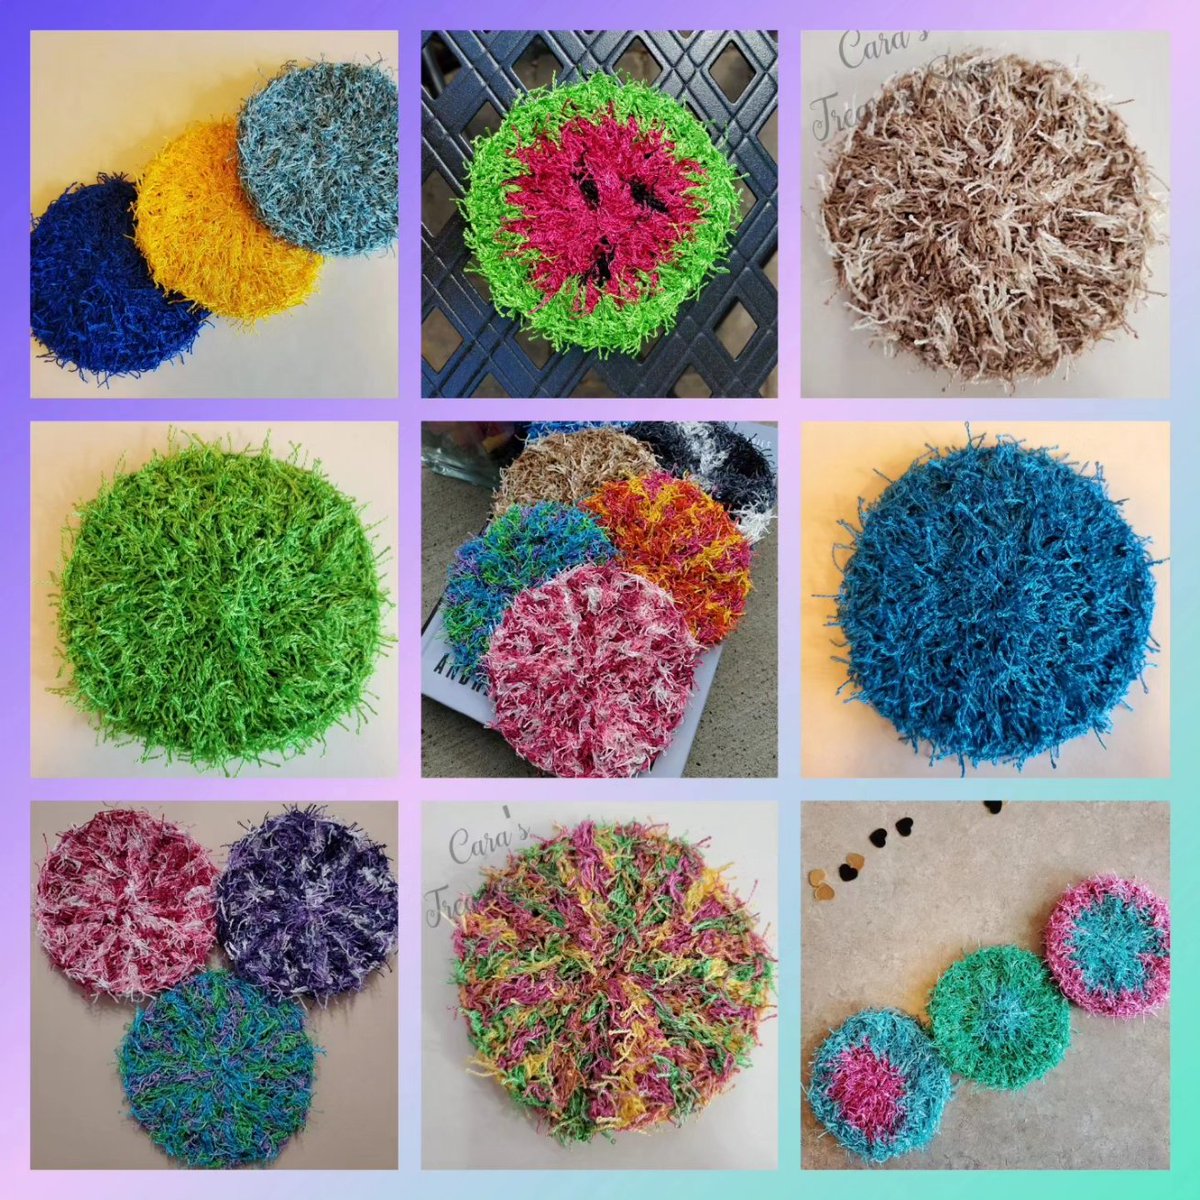 Super Awesome Dish Scrubbies in my Etsy and Amazon shops! They can clean almost anything. And they don't scratch finishes! I have lots of styles, sizes and colors to choose from! Etsy: Carastreasureshop.etsy.com Amazon: Amazon.com/shops/Carastre… AmazonCanada: Amazon.ca/shops/Carastre…